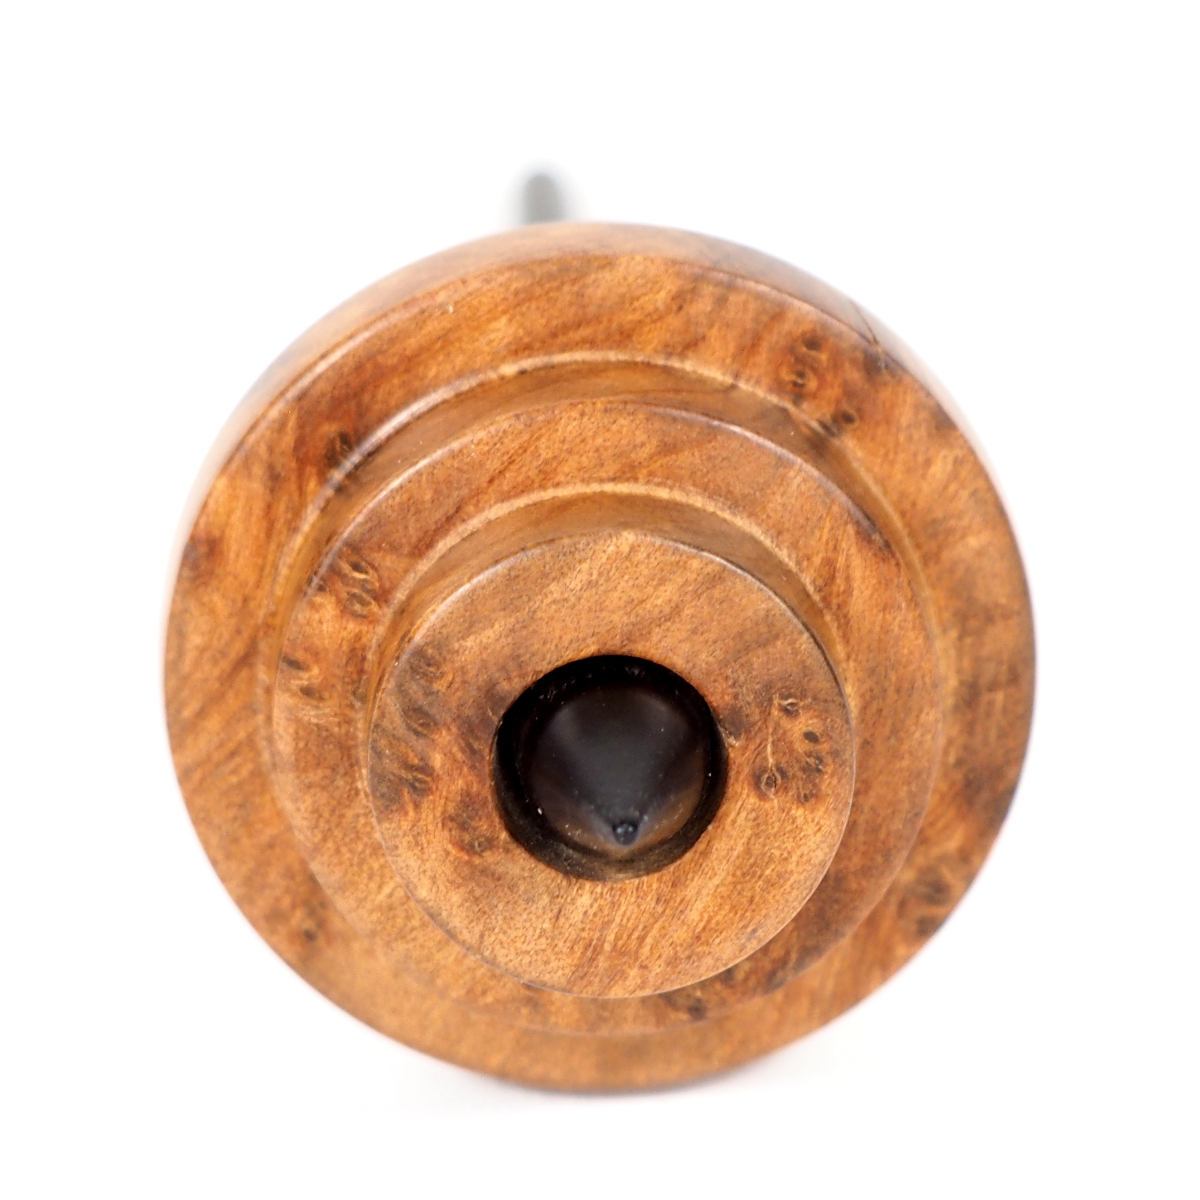 Hand-Turned Wooden Spinning Top "Pre-Cision"